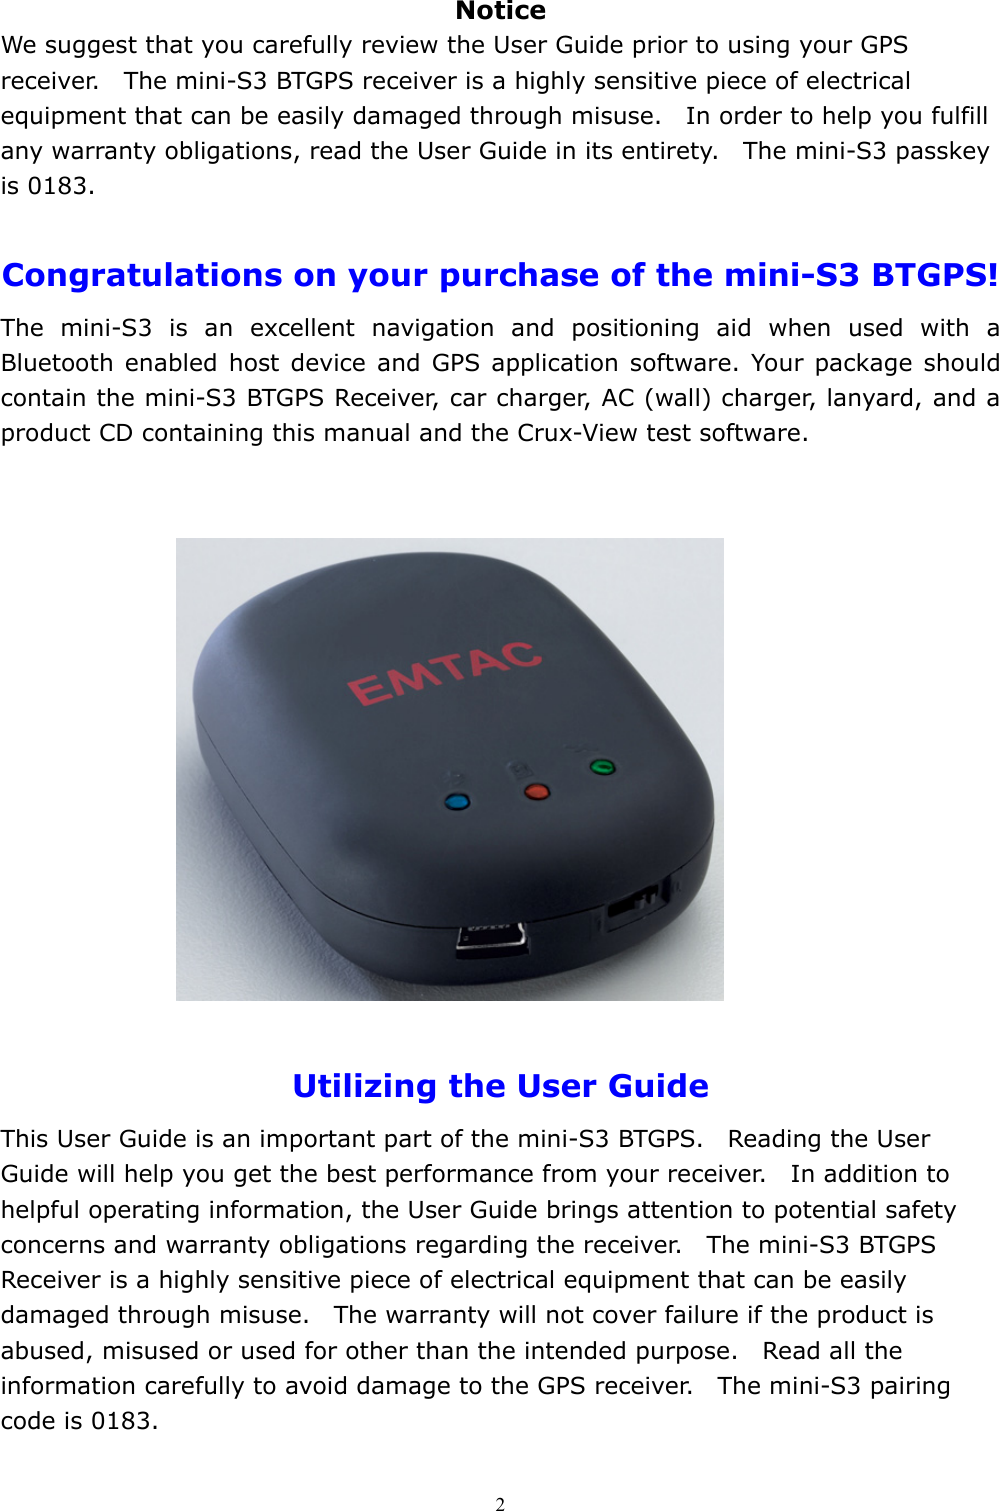  2Notice We suggest that you carefully review the User Guide prior to using your GPS receiver.    The mini-S3 BTGPS receiver is a highly sensitive piece of electrical equipment that can be easily damaged through misuse.    In order to help you fulfill any warranty obligations, read the User Guide in its entirety.    The mini-S3 passkey is 0183.  Congratulations on your purchase of the mini-S3 BTGPS! The mini-S3 is an excellent navigation and positioning aid when used with a Bluetooth enabled host device and GPS application software. Your package should contain the mini-S3 BTGPS Receiver, car charger, AC (wall) charger, lanyard, and a product CD containing this manual and the Crux-View test software.              Utilizing the User Guide This User Guide is an important part of the mini-S3 BTGPS.    Reading the User Guide will help you get the best performance from your receiver.    In addition to helpful operating information, the User Guide brings attention to potential safety concerns and warranty obligations regarding the receiver.    The mini-S3 BTGPS Receiver is a highly sensitive piece of electrical equipment that can be easily damaged through misuse.    The warranty will not cover failure if the product is abused, misused or used for other than the intended purpose.    Read all the information carefully to avoid damage to the GPS receiver.    The mini-S3 pairing code is 0183. 